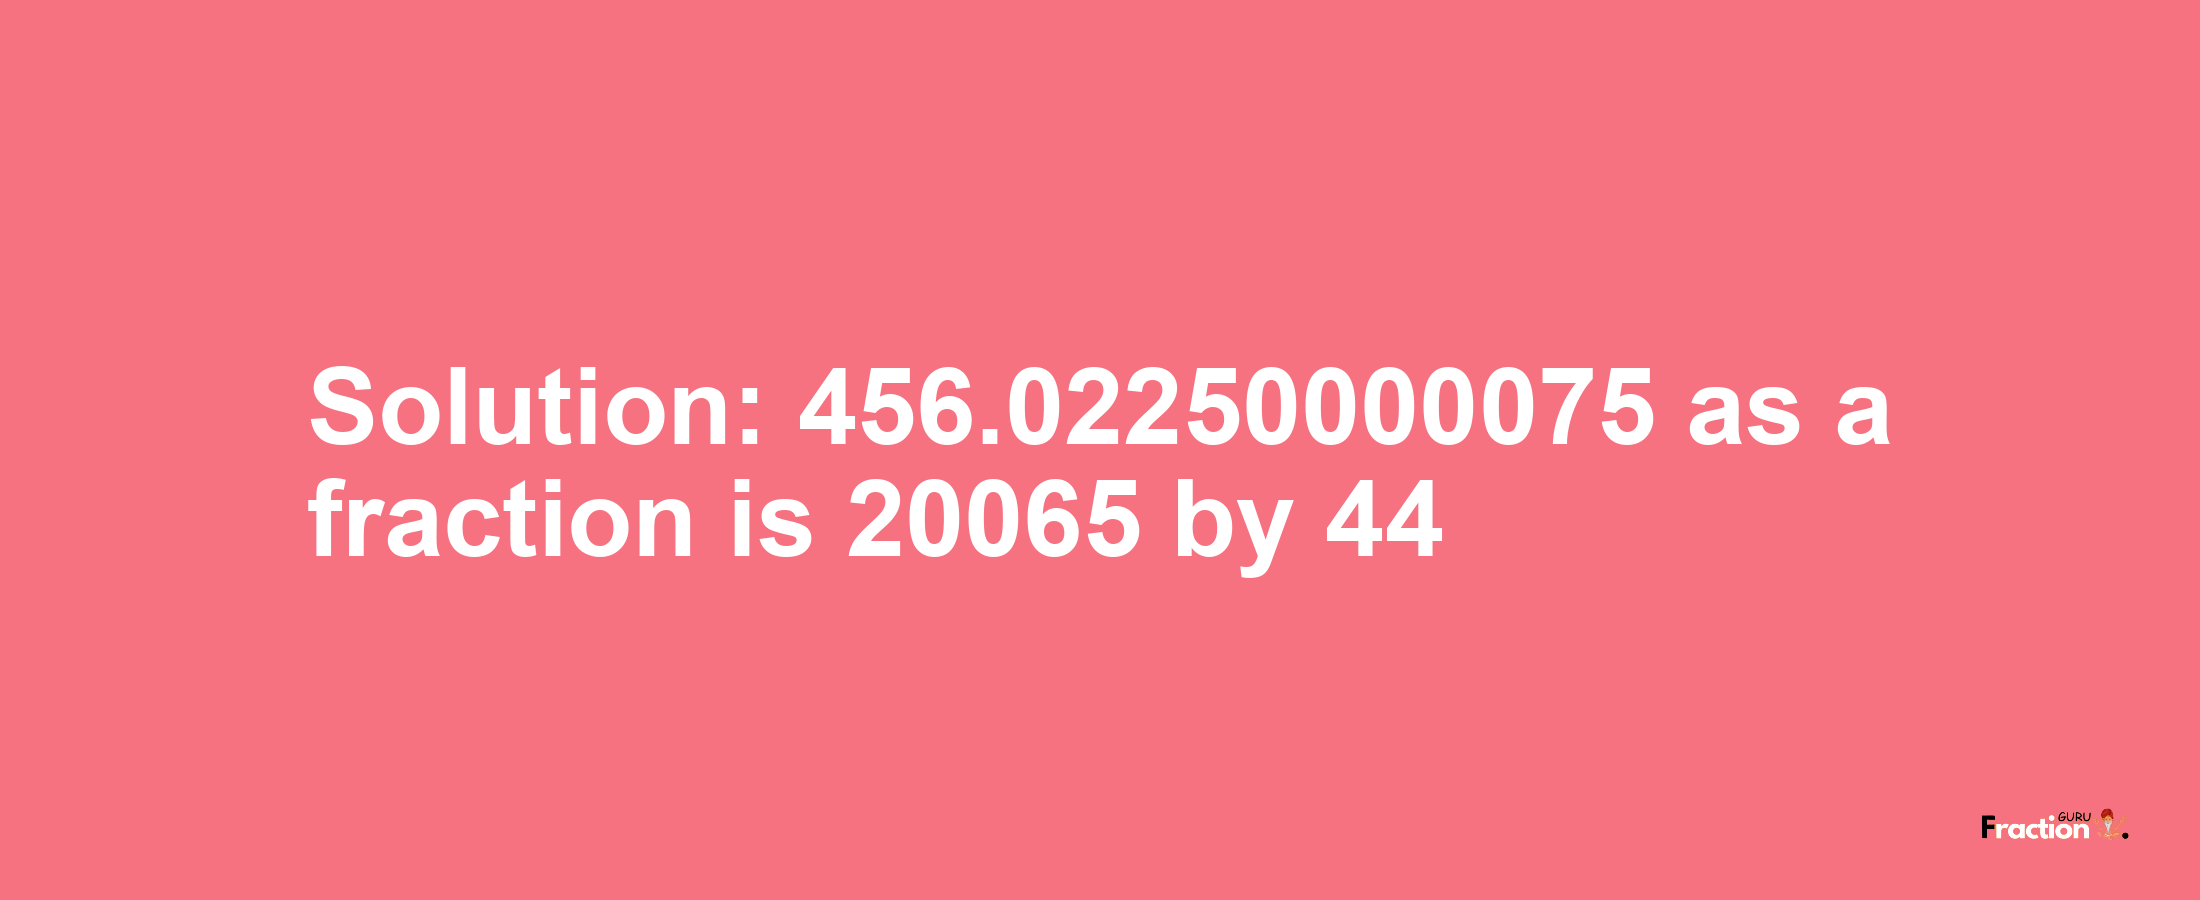 Solution:456.02250000075 as a fraction is 20065/44